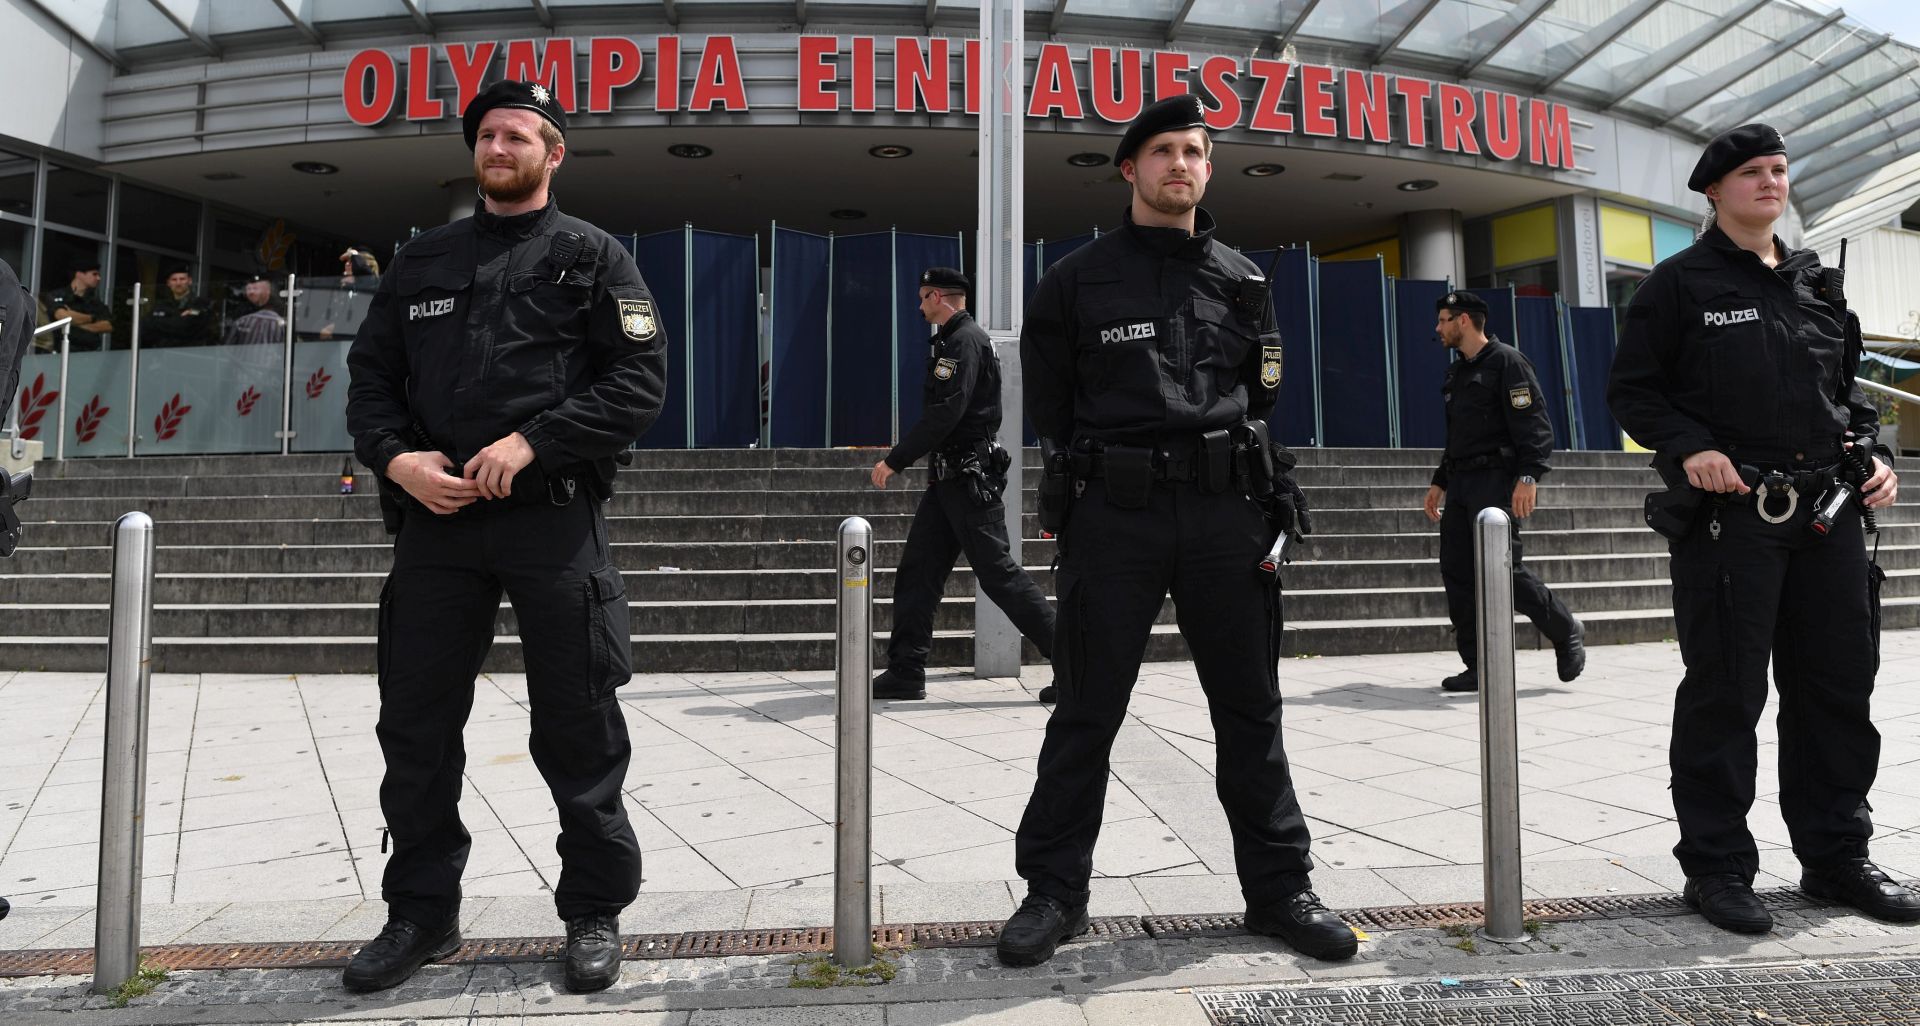 epa05437893 Police forces stand in front of the Olympia shopping center in Munich, Germany, 23 July 2016. According to authorities, at least 10 people died, including the suspect, after a shooting spree at the Olympia shopping centre in Munich on 22 July 2016. Police on 23 July 2016 said it was a 'classical amok run' by an 18-year-old Munich-born young man.  EPA/SVEN HOPPE